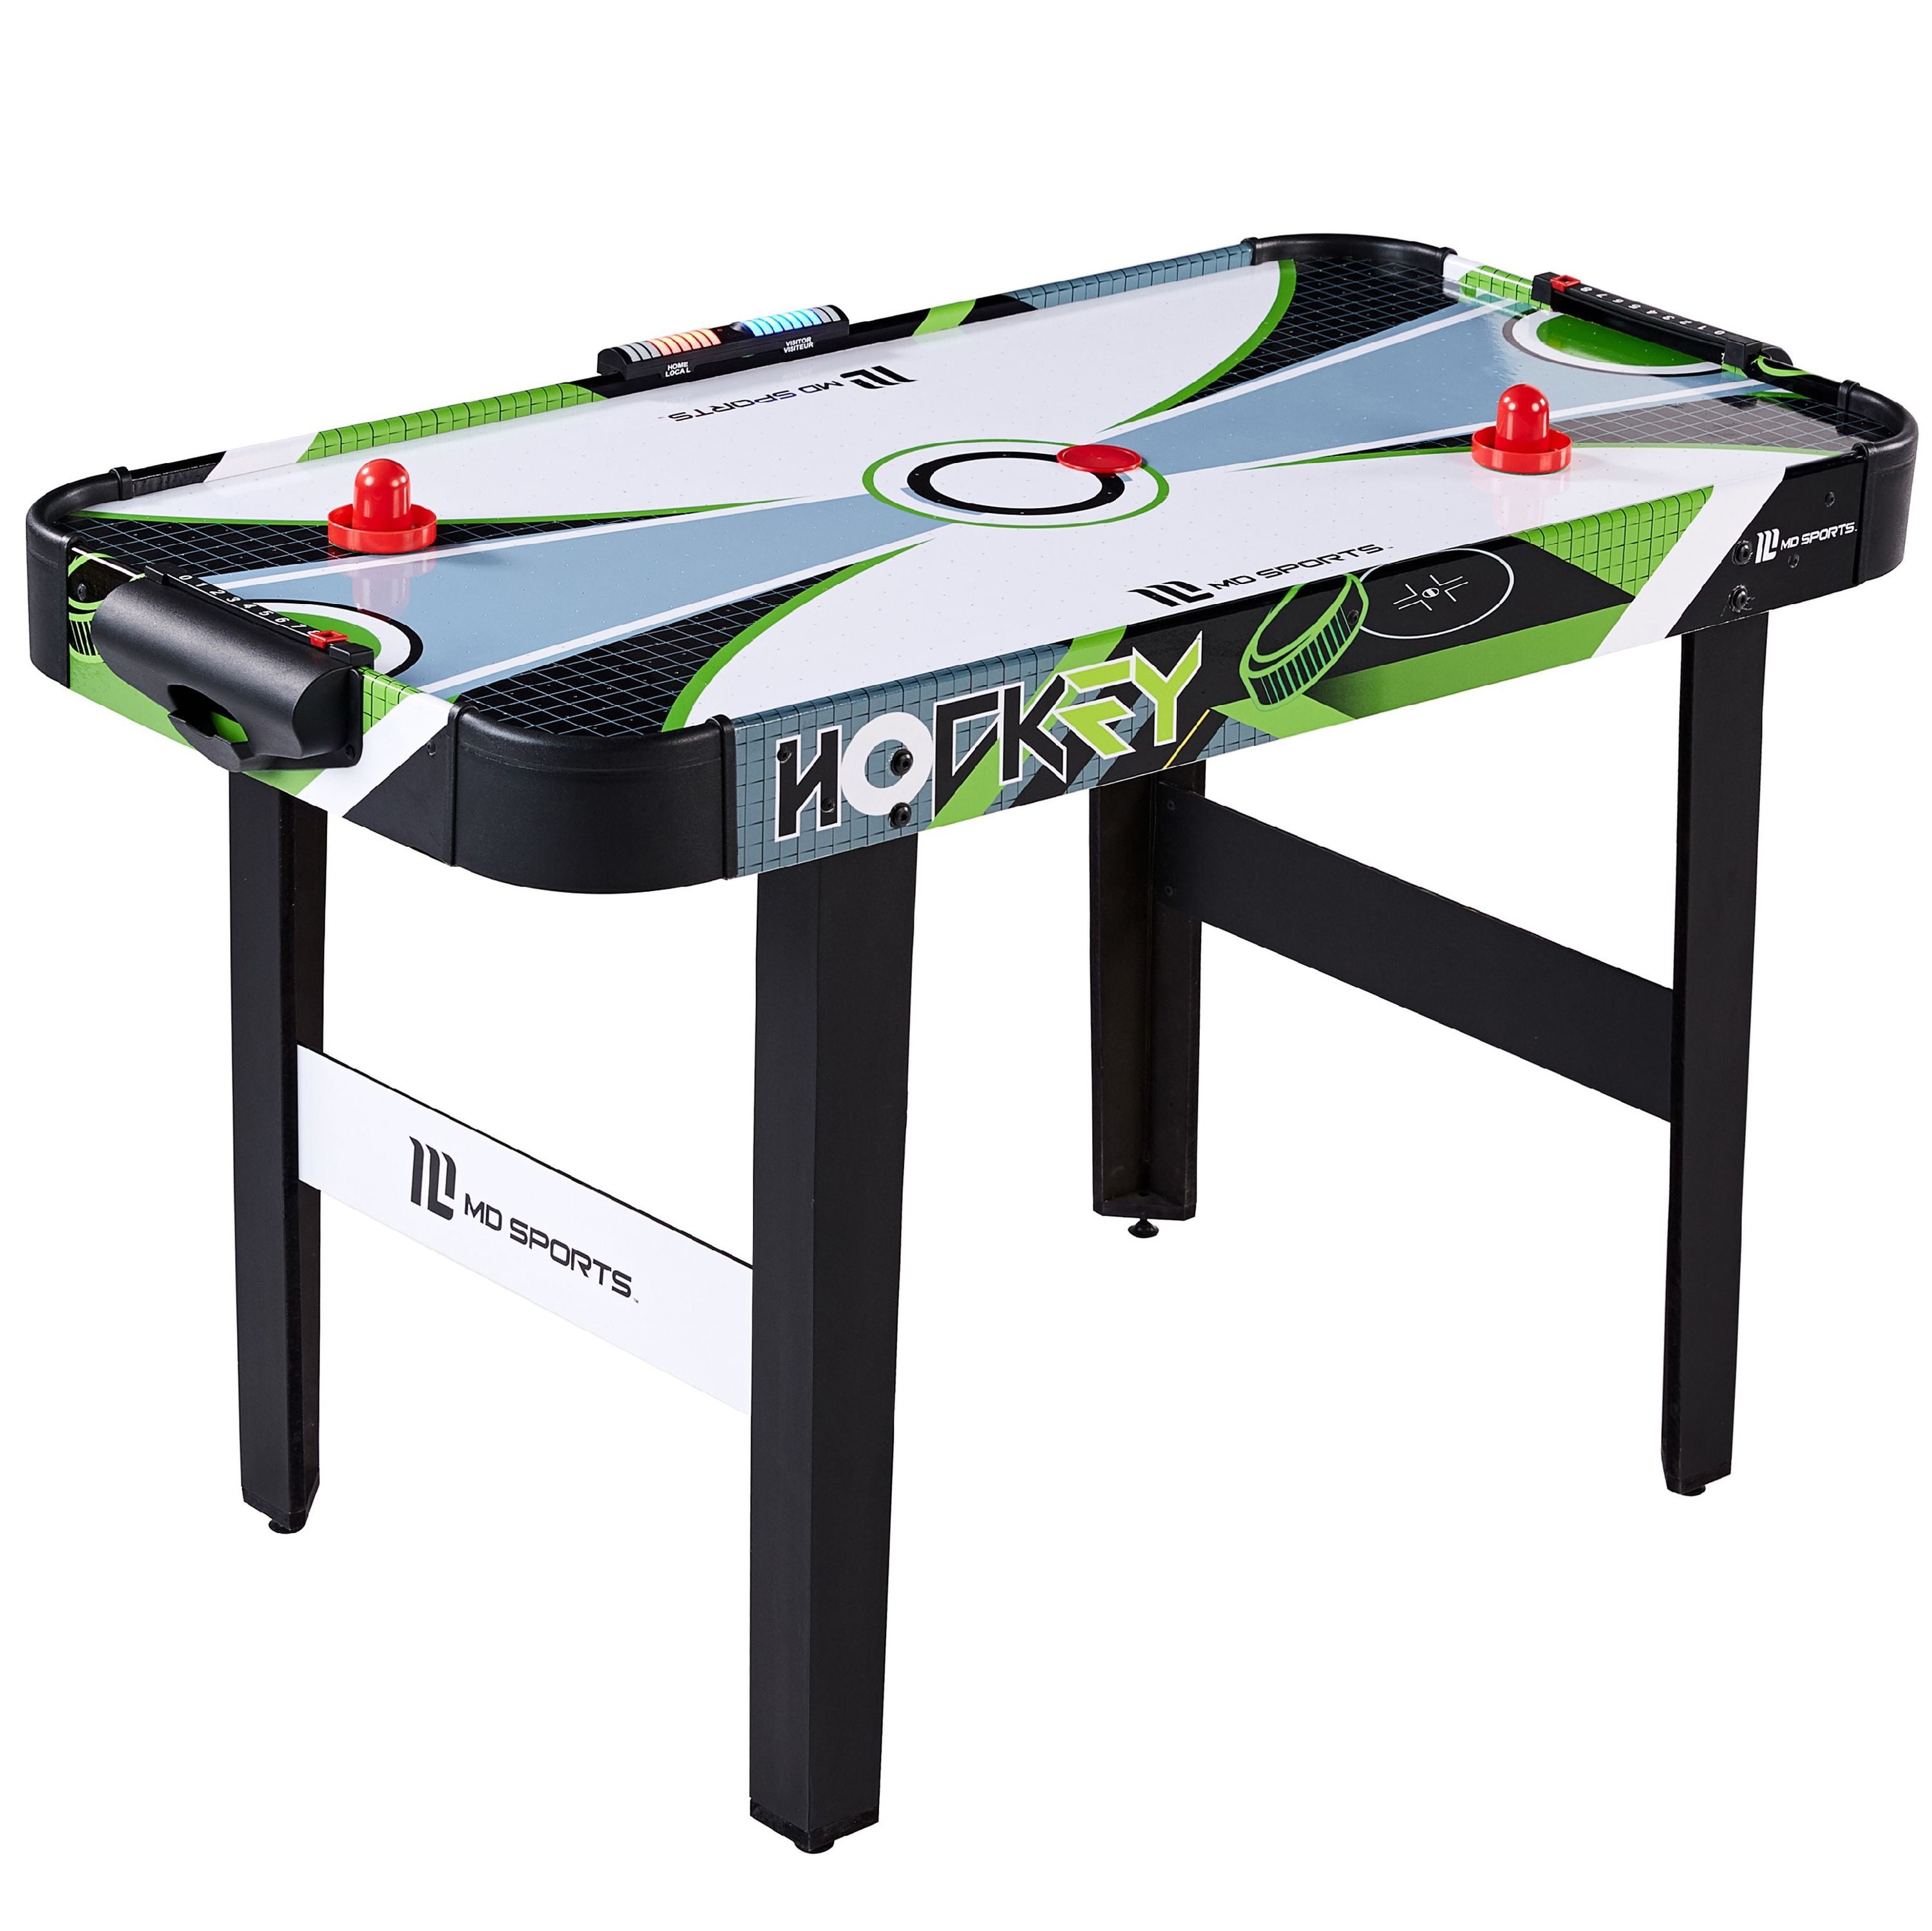 Md Sports 48 Inch Air Powered Hockey Table With Led Electronic